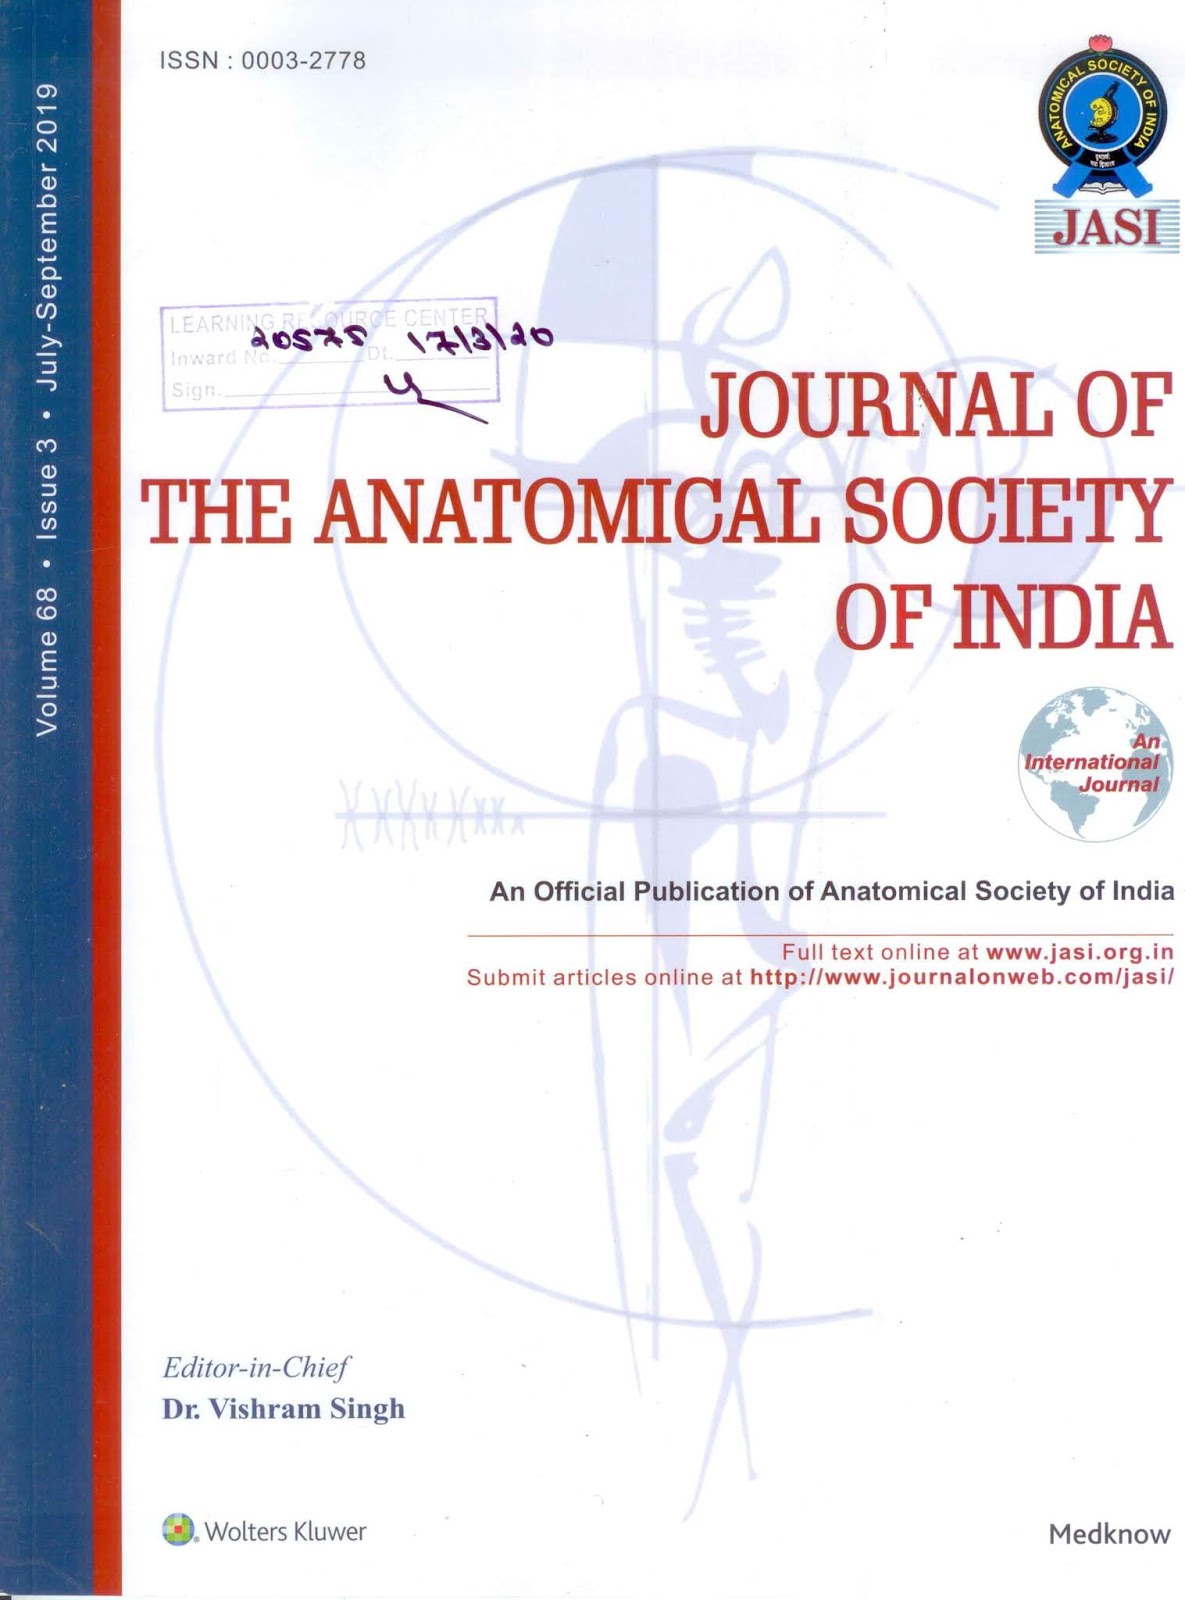 http://www.jasi.org.in/showBackIssue.asp?issn=0003-2778;year=2019;volume=68;issue=3;month=July-September